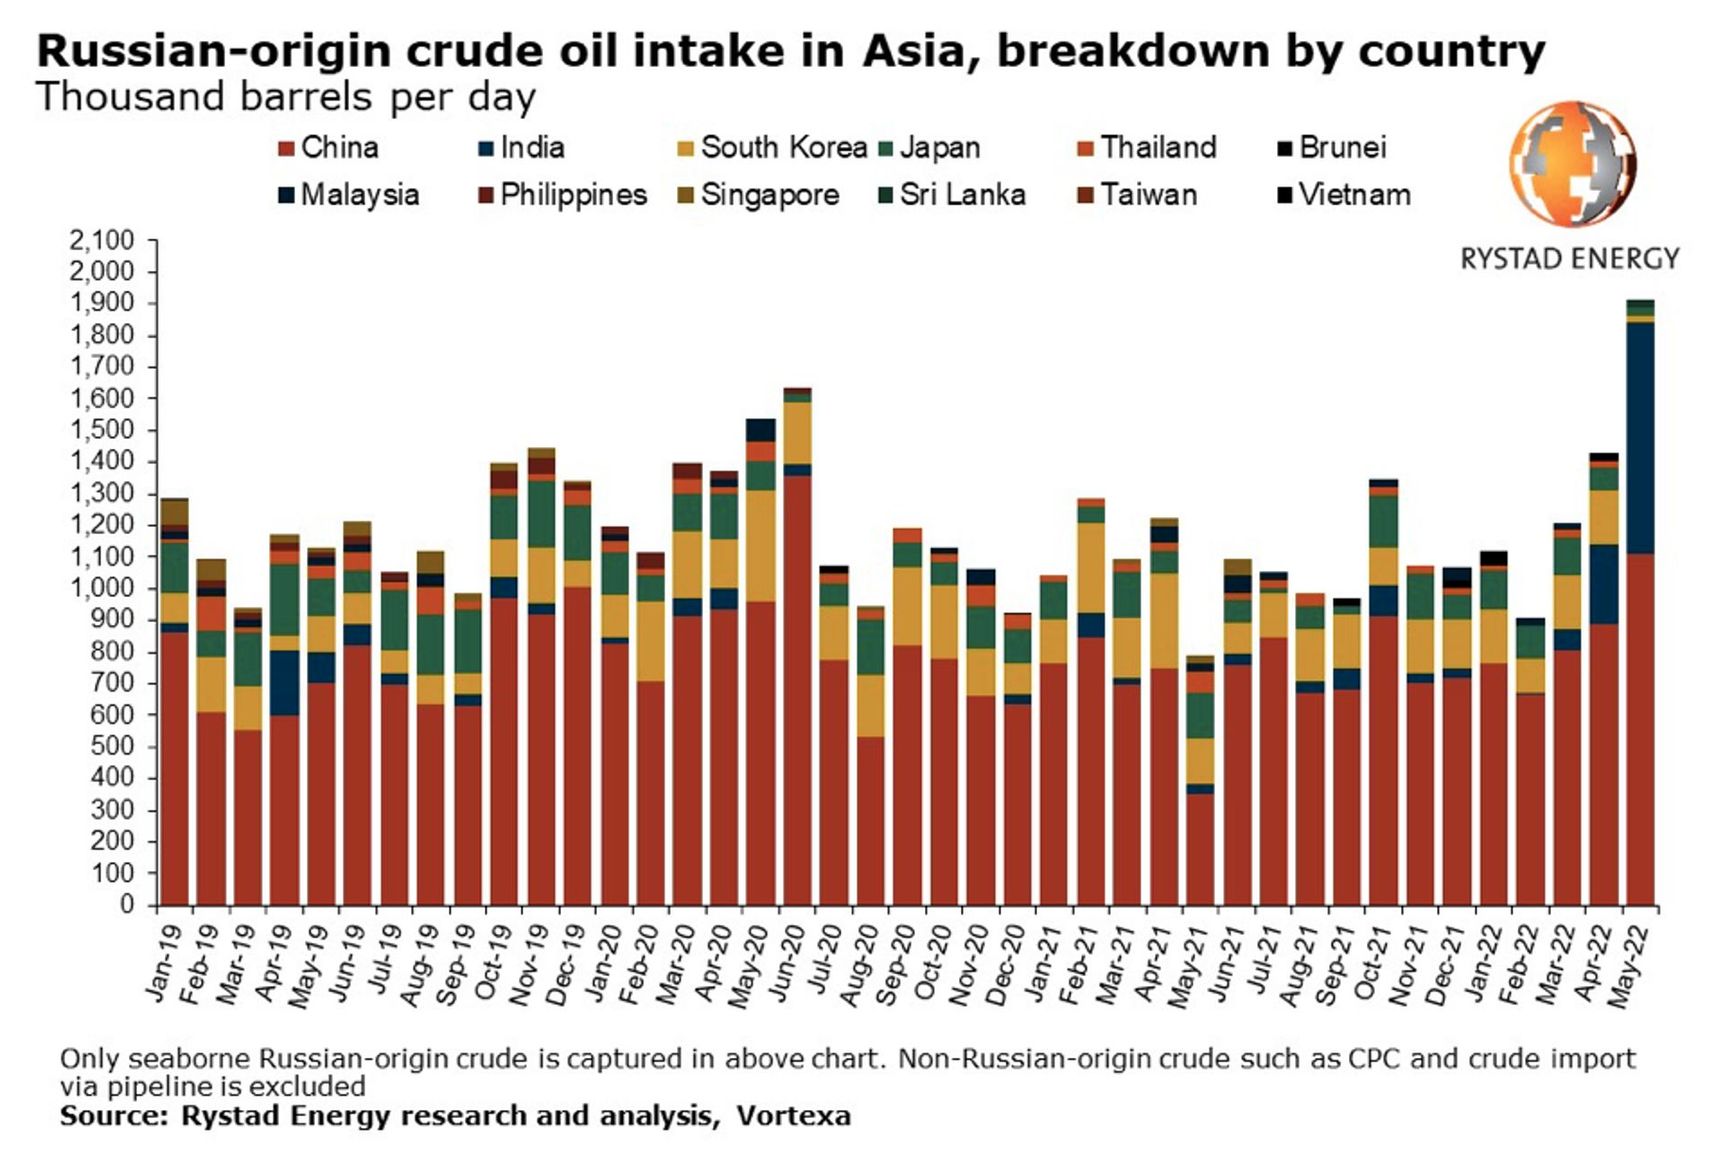 Oil shipment destinations from Russia by region  https://www.rystadenergy.com/newsevents/news/press-releases/Asia-imports-more-seaborne-Russian-oil-than-Europe-with-India-taking-the-lion-share-of-Urals/